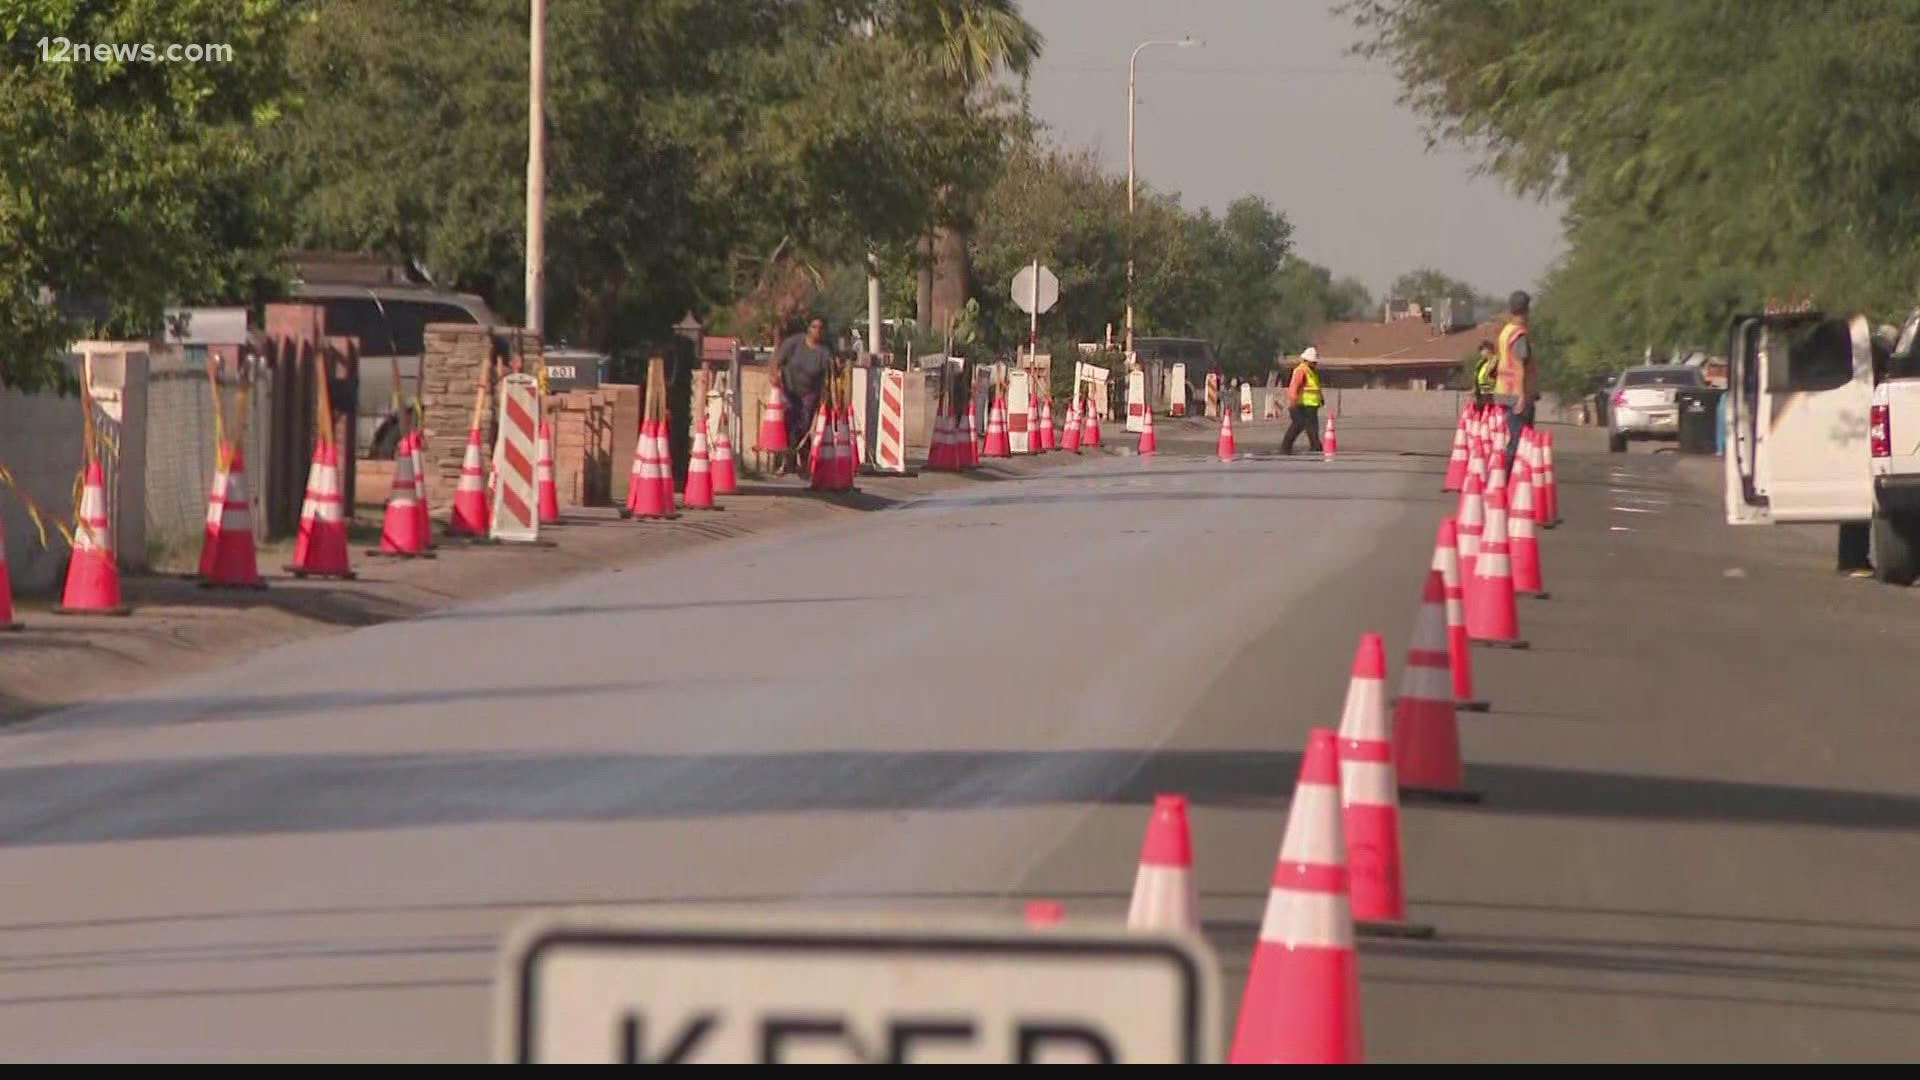 The City of Phoenix and ASU are working to seal parts of roads in the city with a coating that has a high reflective value. It could reduce temps 10 to 12 degrees.